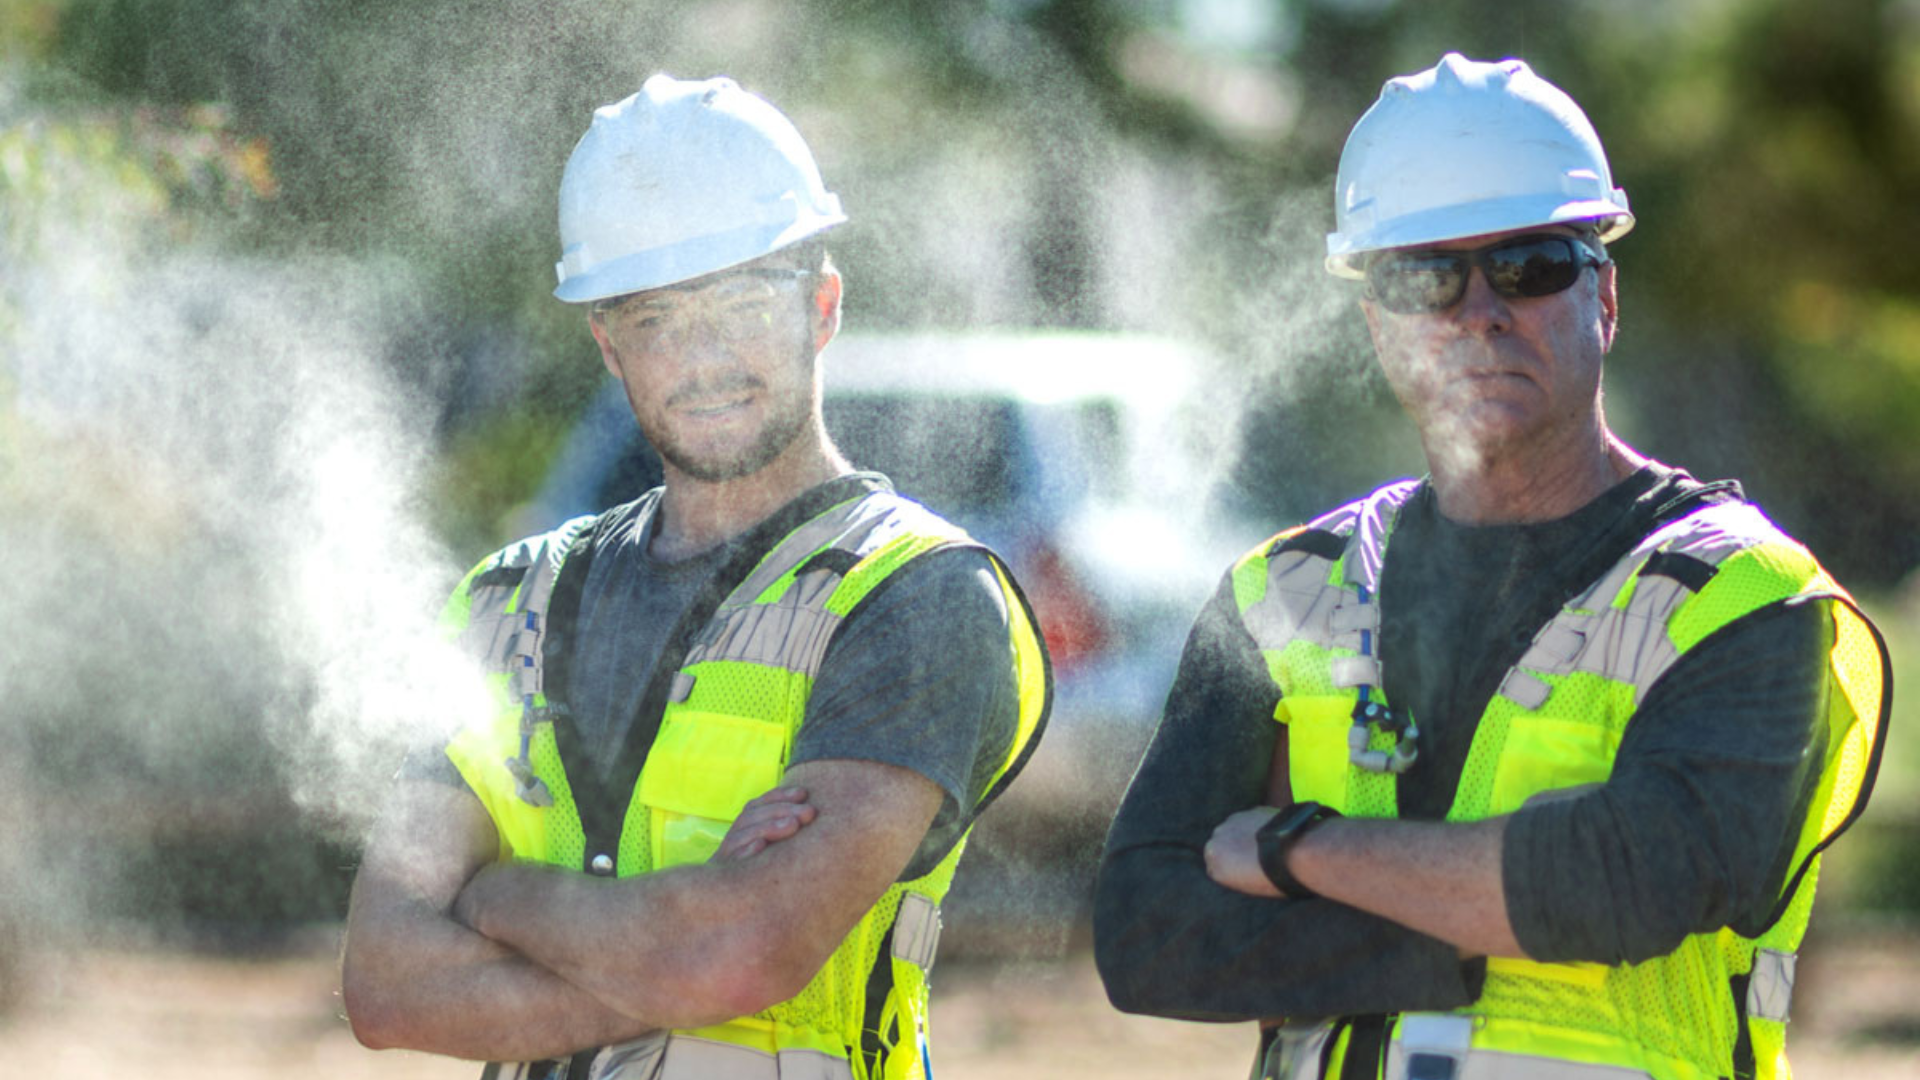 Empowering Outdoor Workers to Beat the Heat